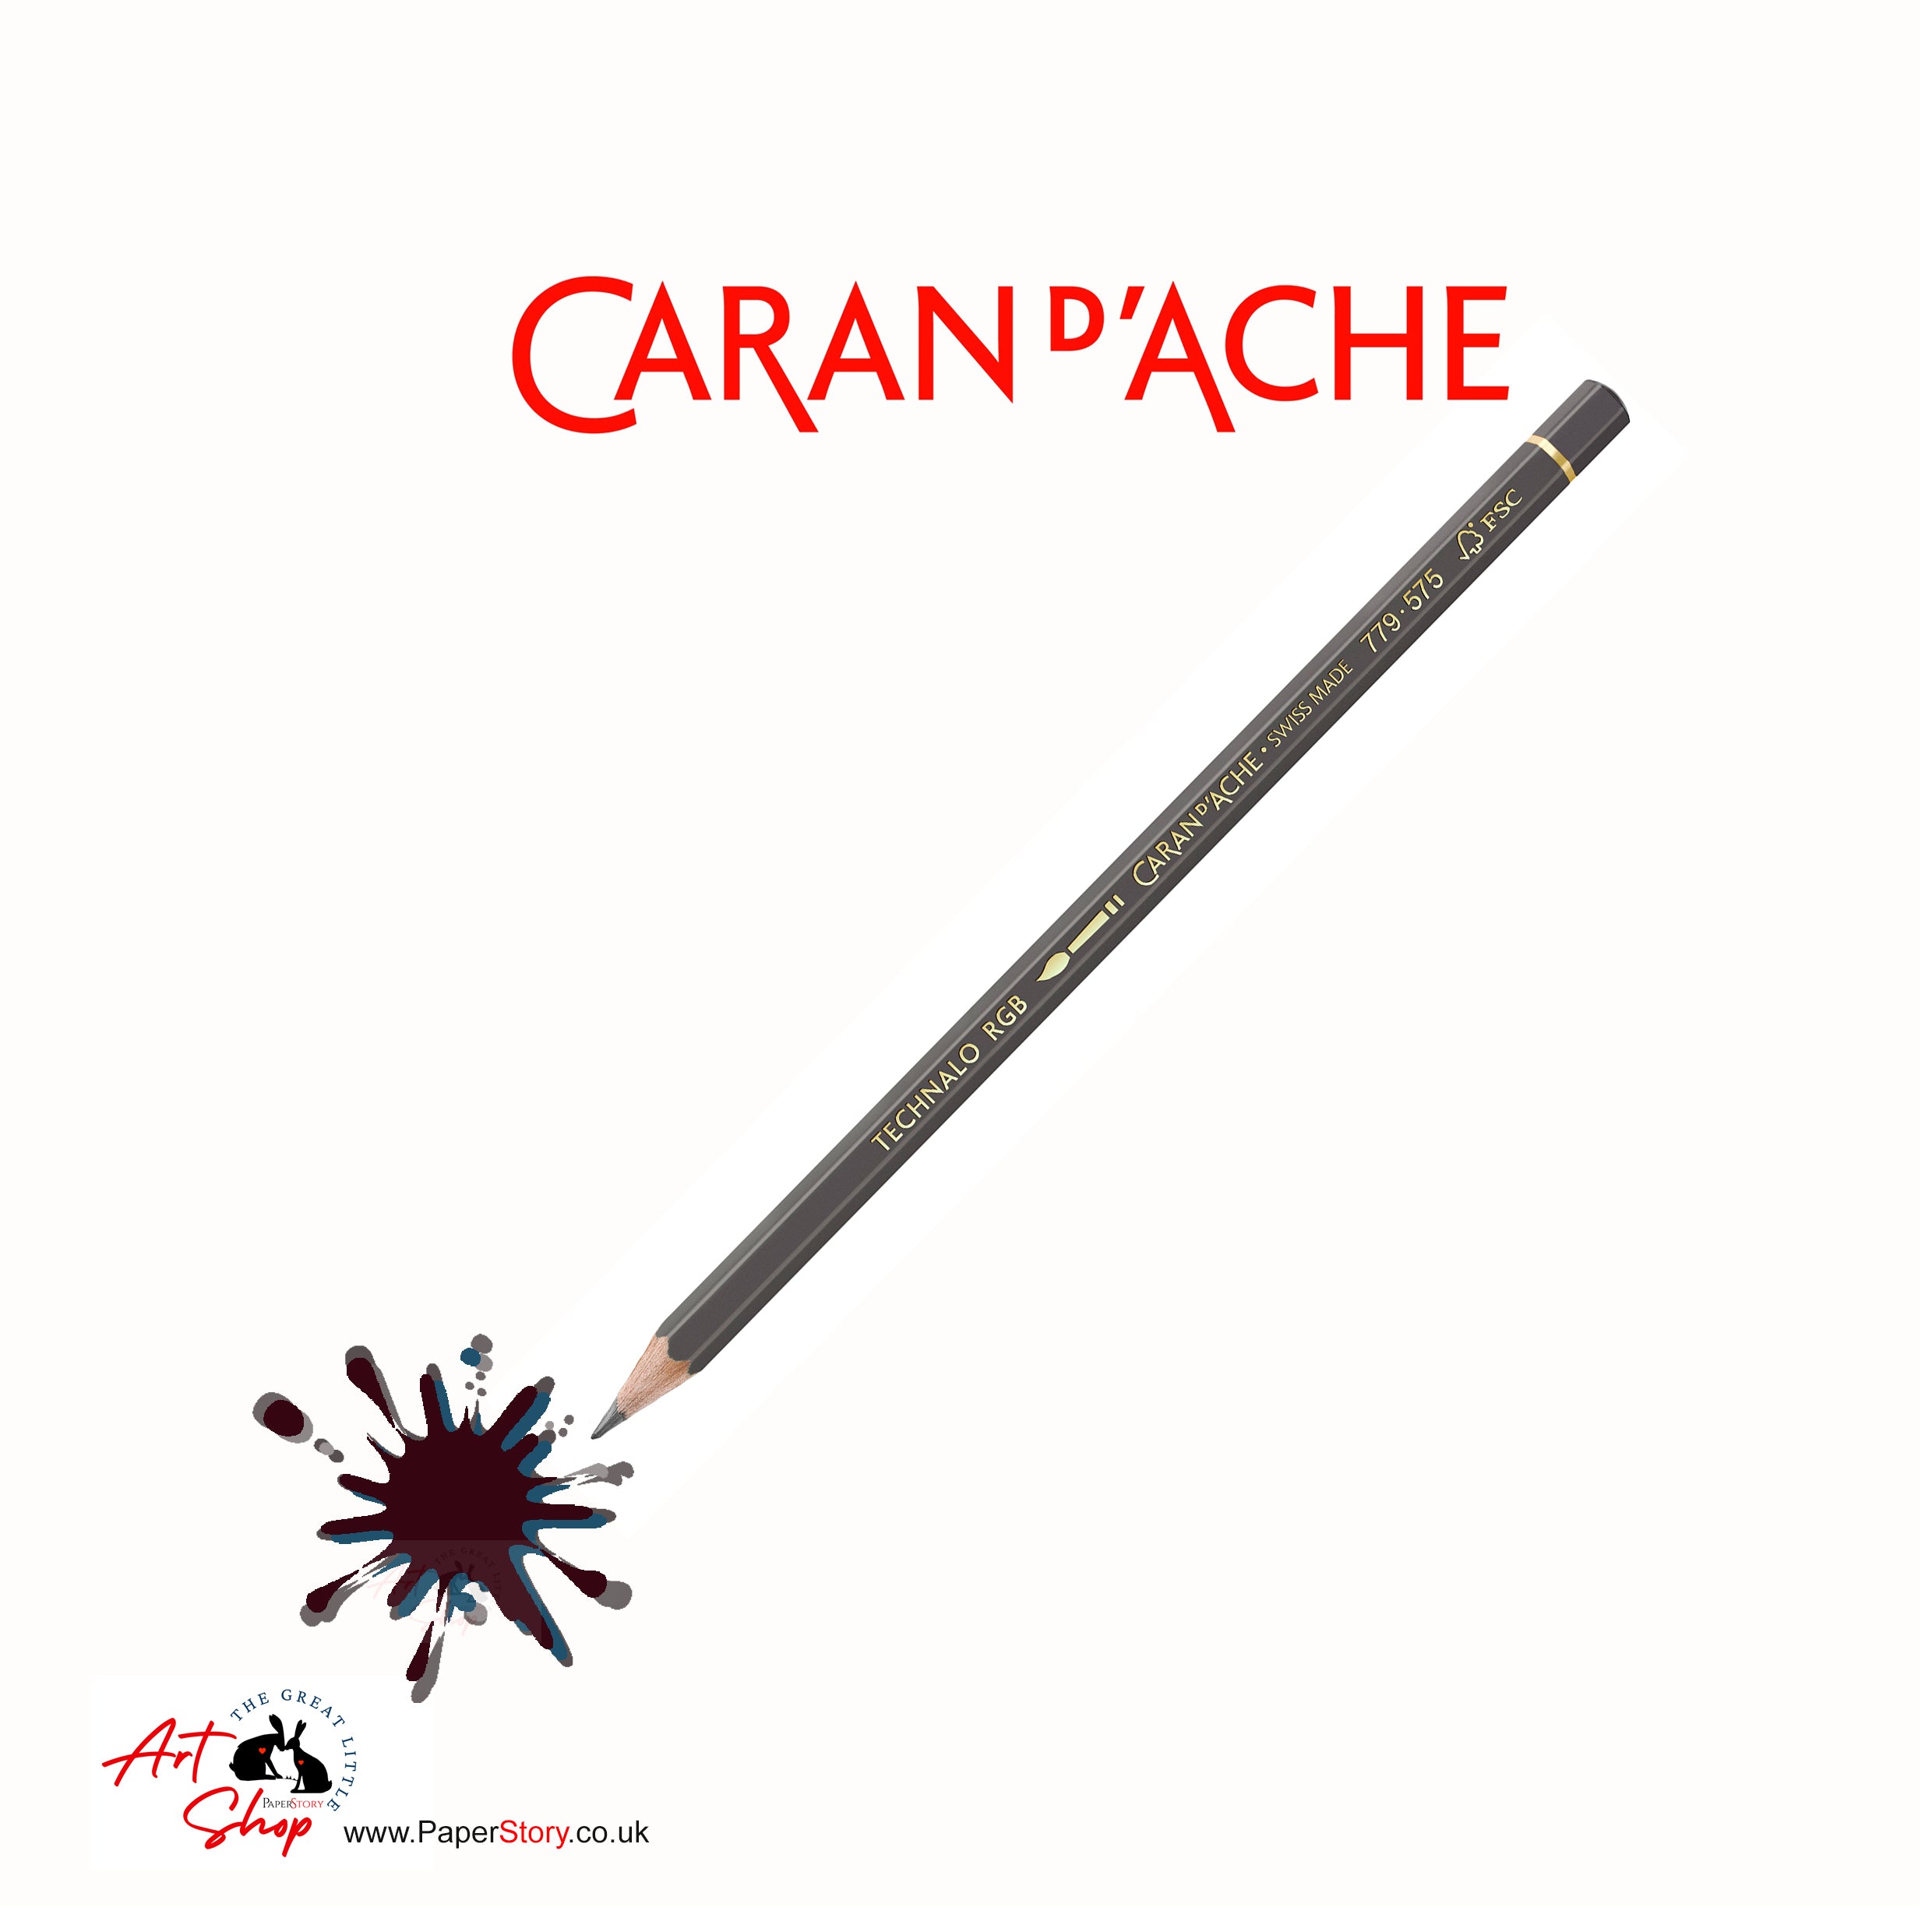 Caran d'Ache RGB tinted water-soluble pencil Carmine Red Graphite Pencil 575